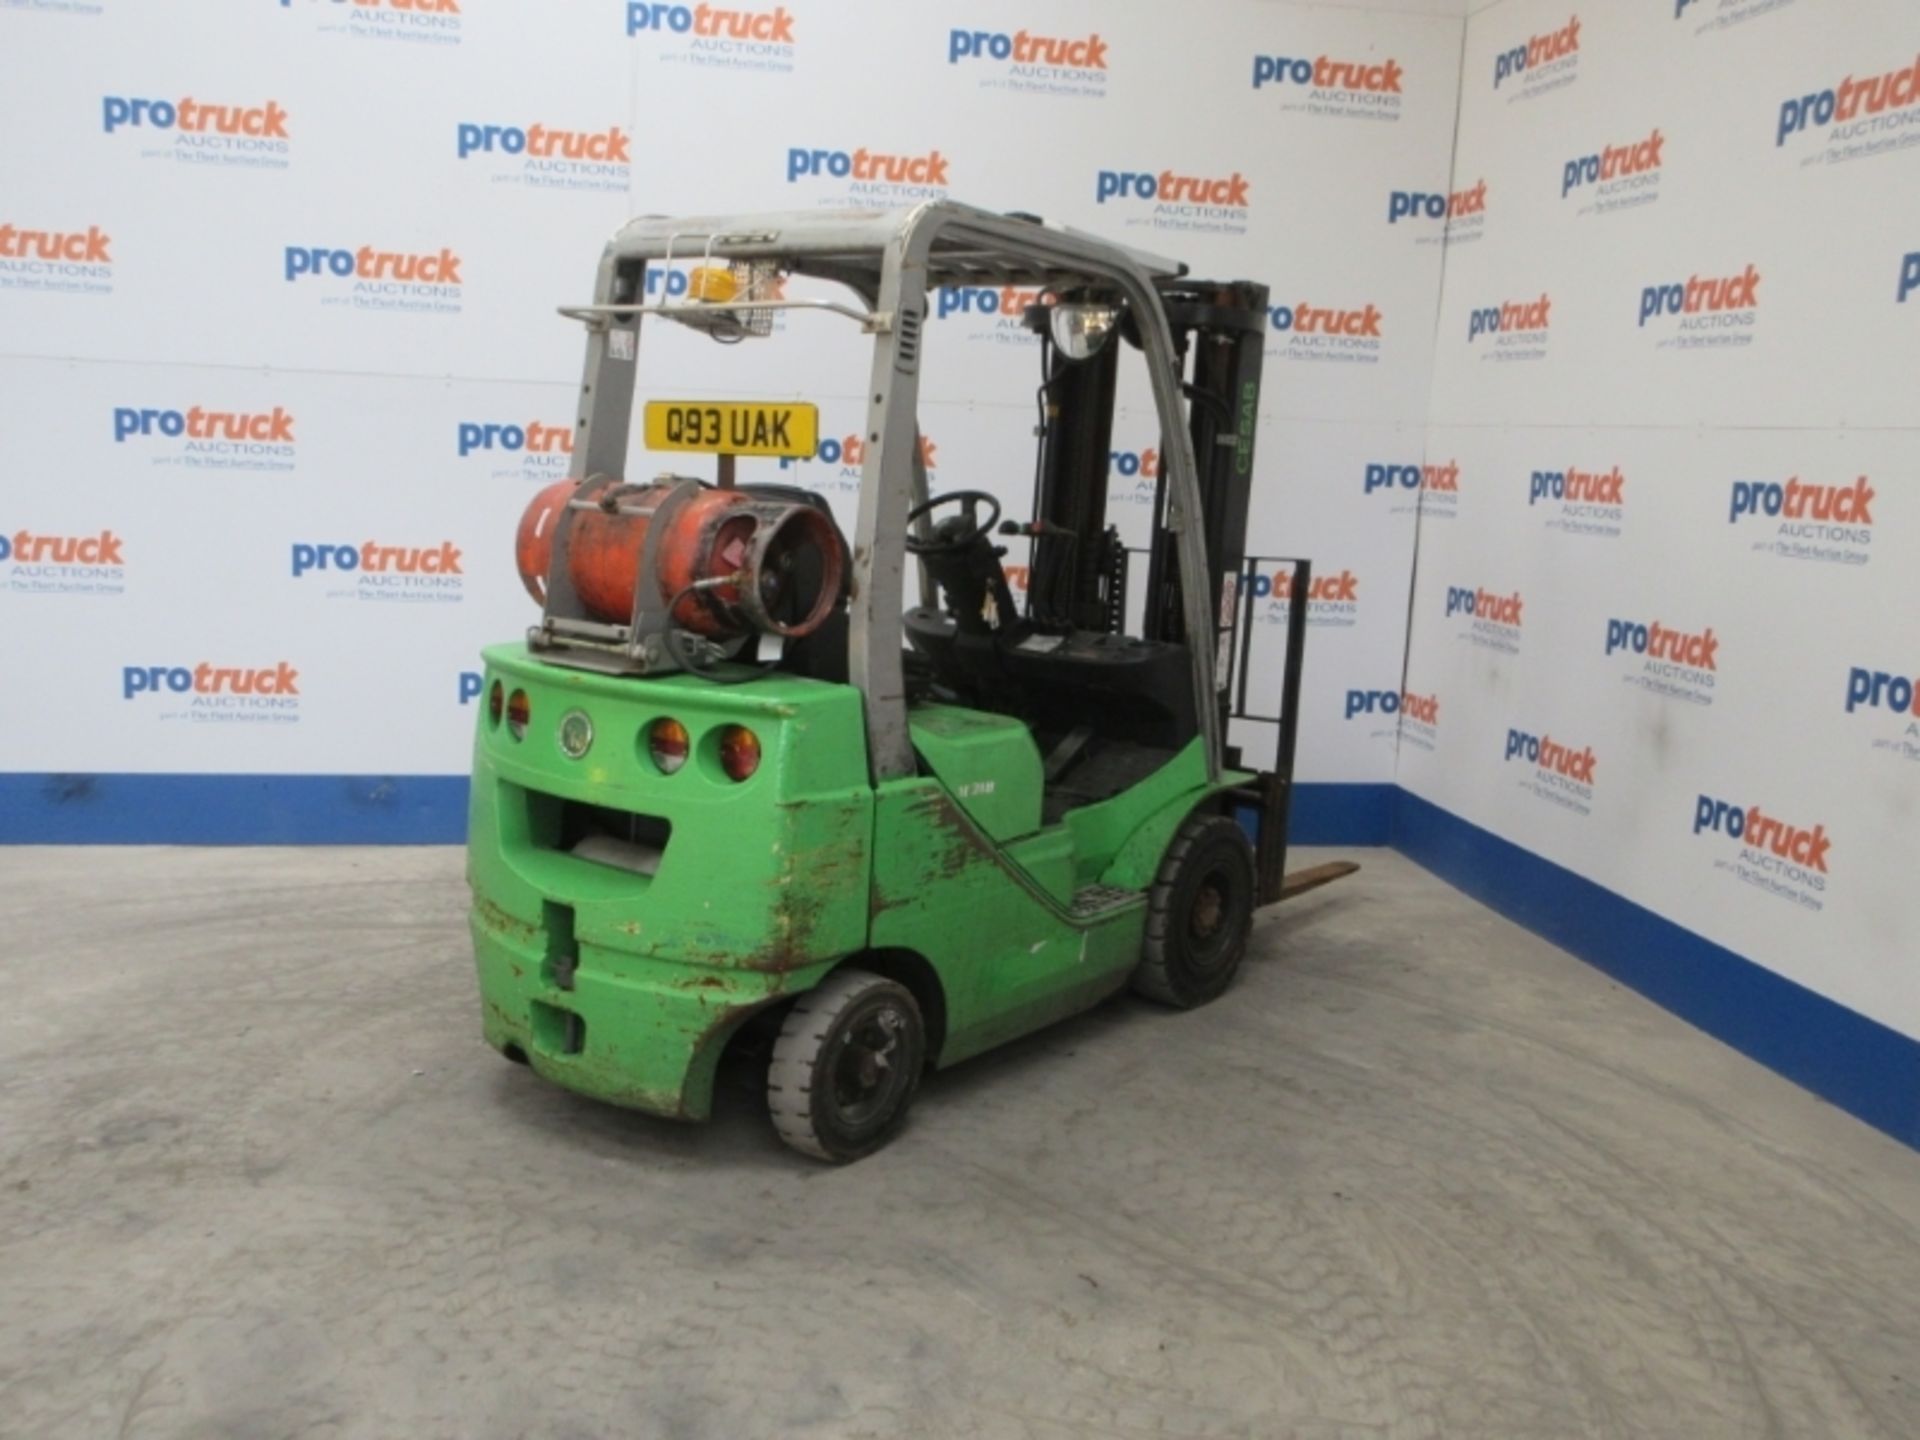 CESAB M318G Plant LPG / CNG - VIN: CE371985 - Year: 2012 - ? Hours - Triplex sideshift forklift RDL - Image 6 of 8